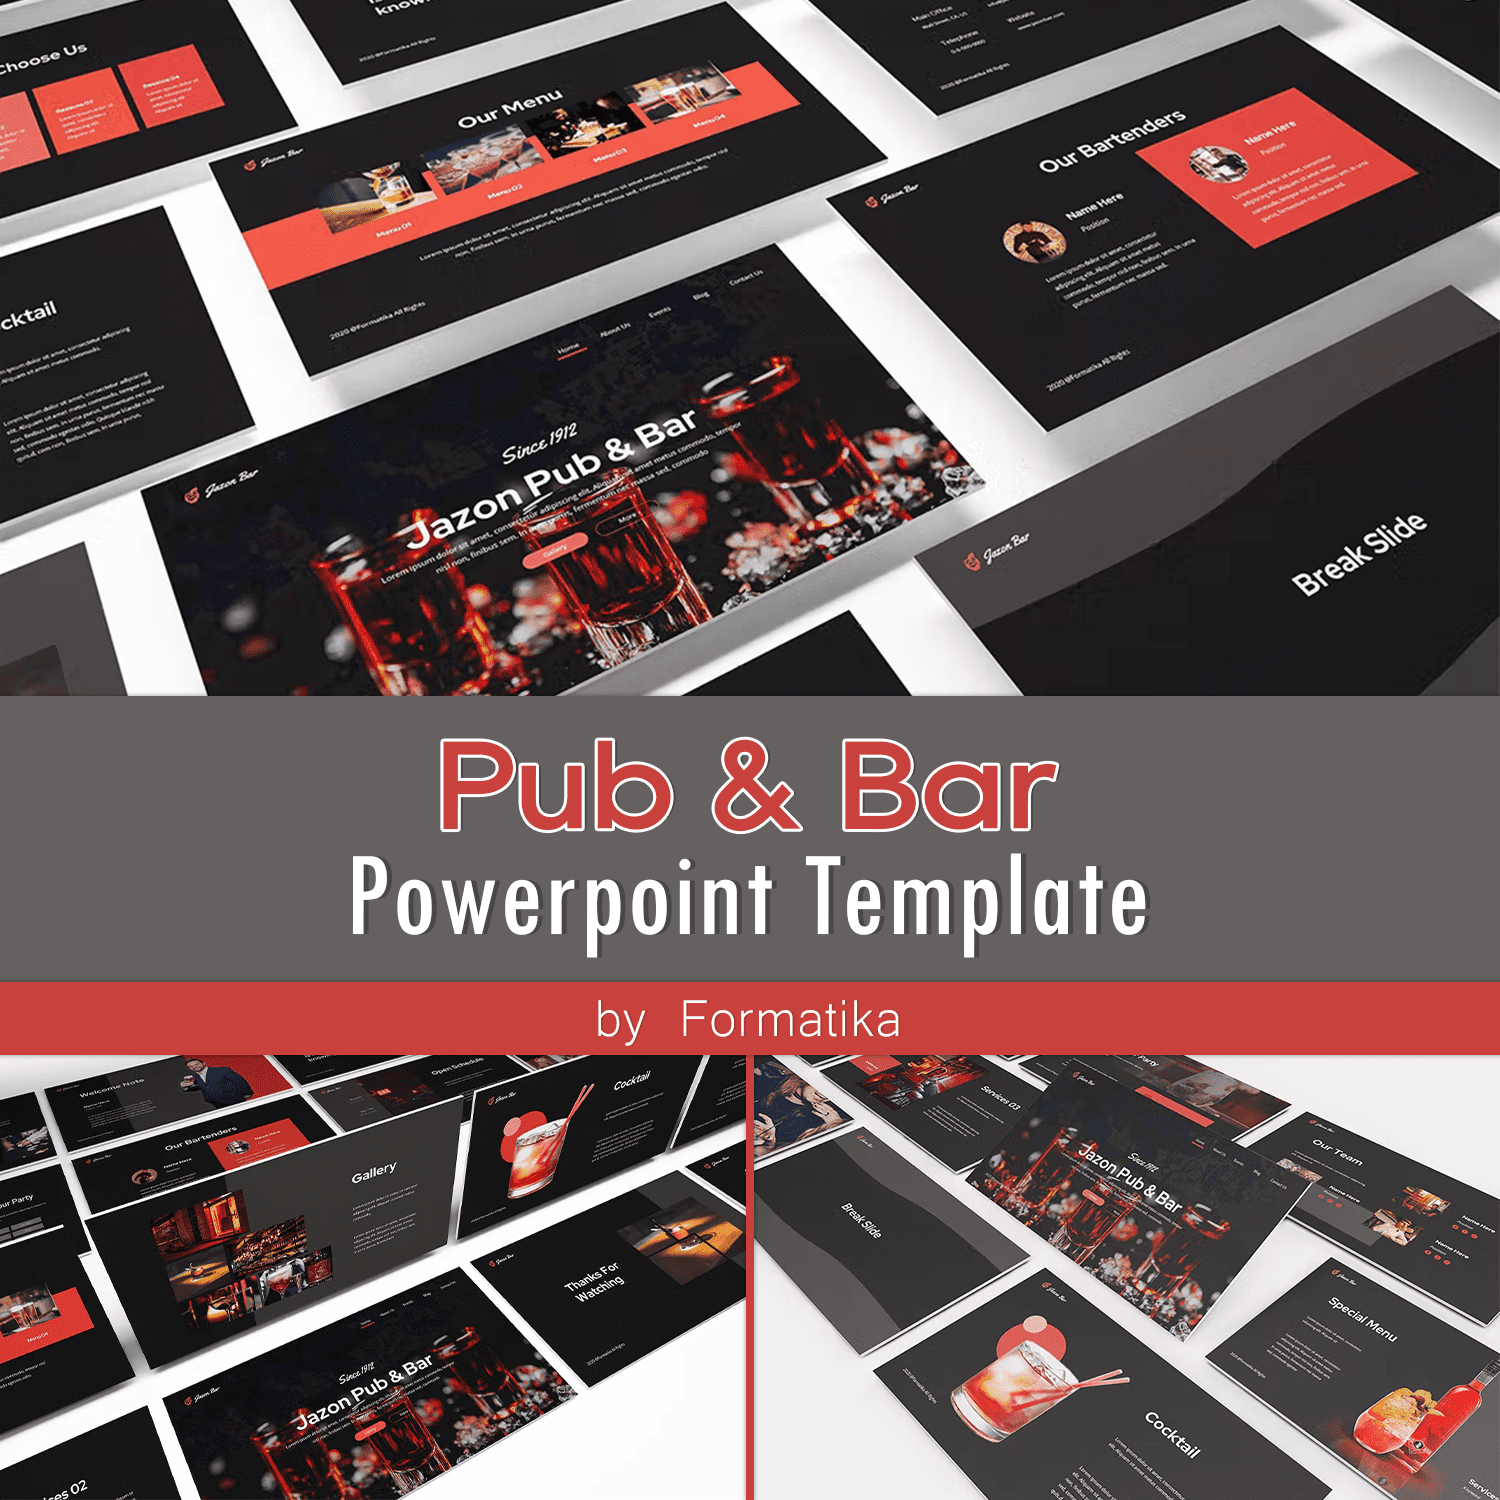 Pub & Bar PowerPoint Template Cover.